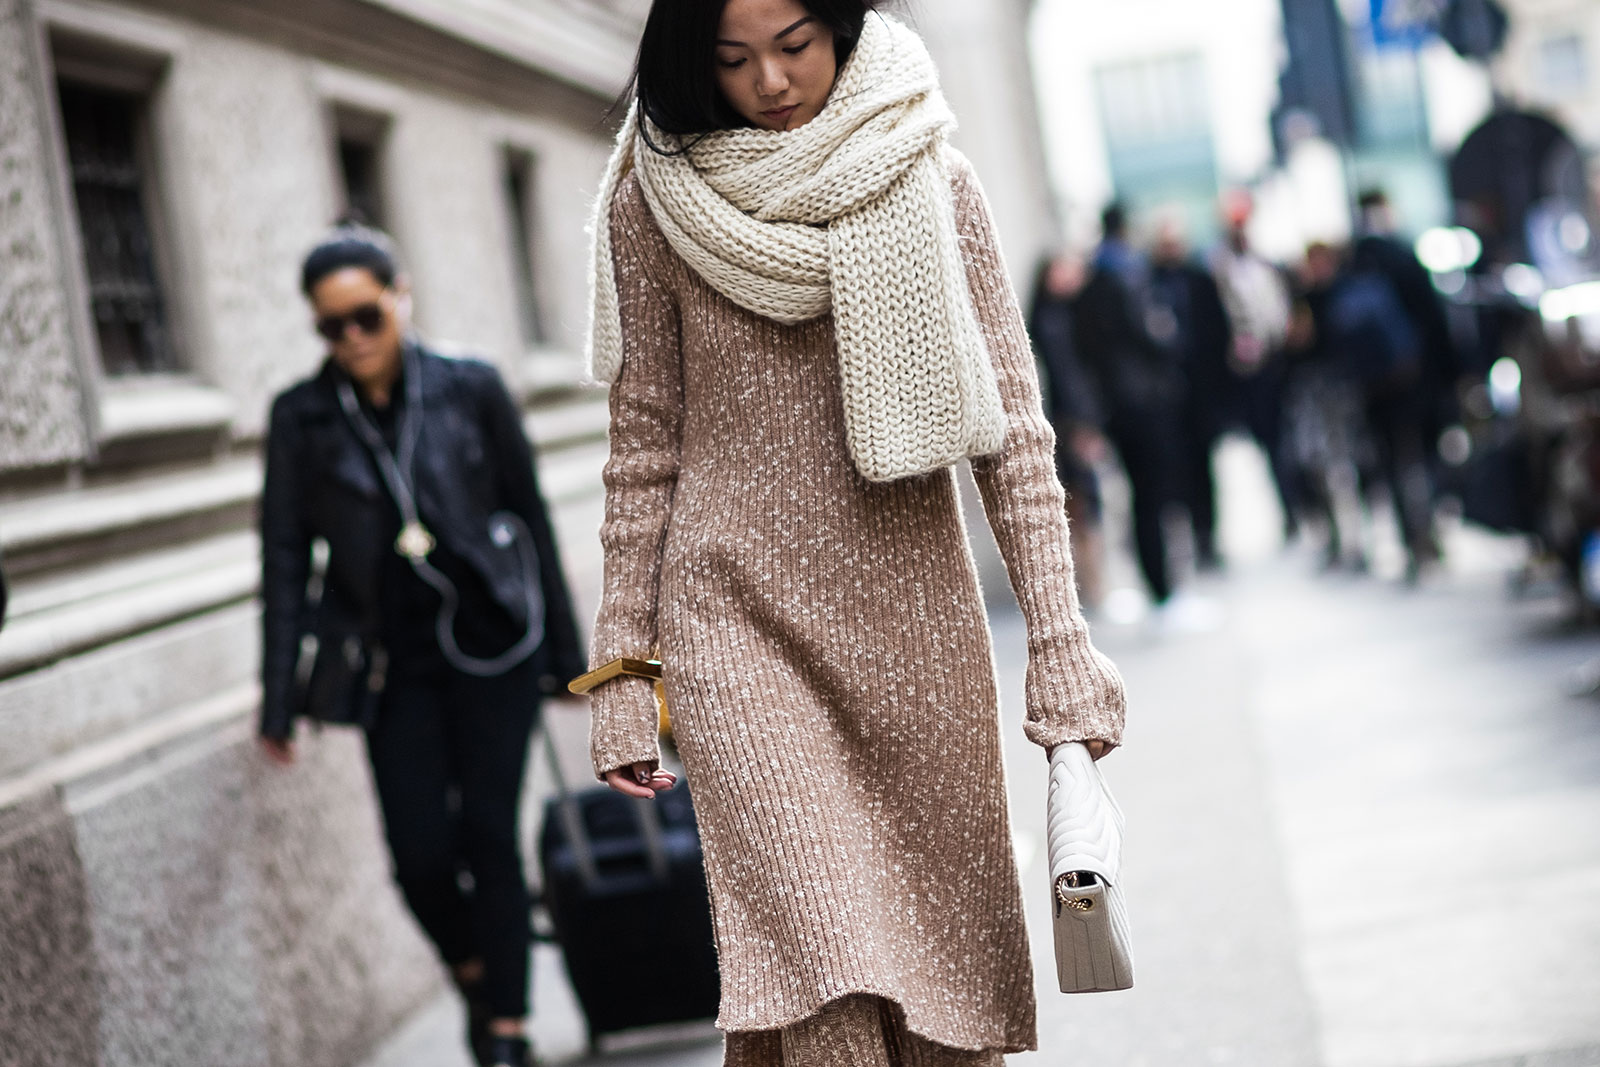 Yoyo Cao wearing Celine knitted sweater and pants and Salvatore Ferragamo bag before the Salvatore Ferragamo Fall/Winter 2015-2016 fashion show in Milan, Italy